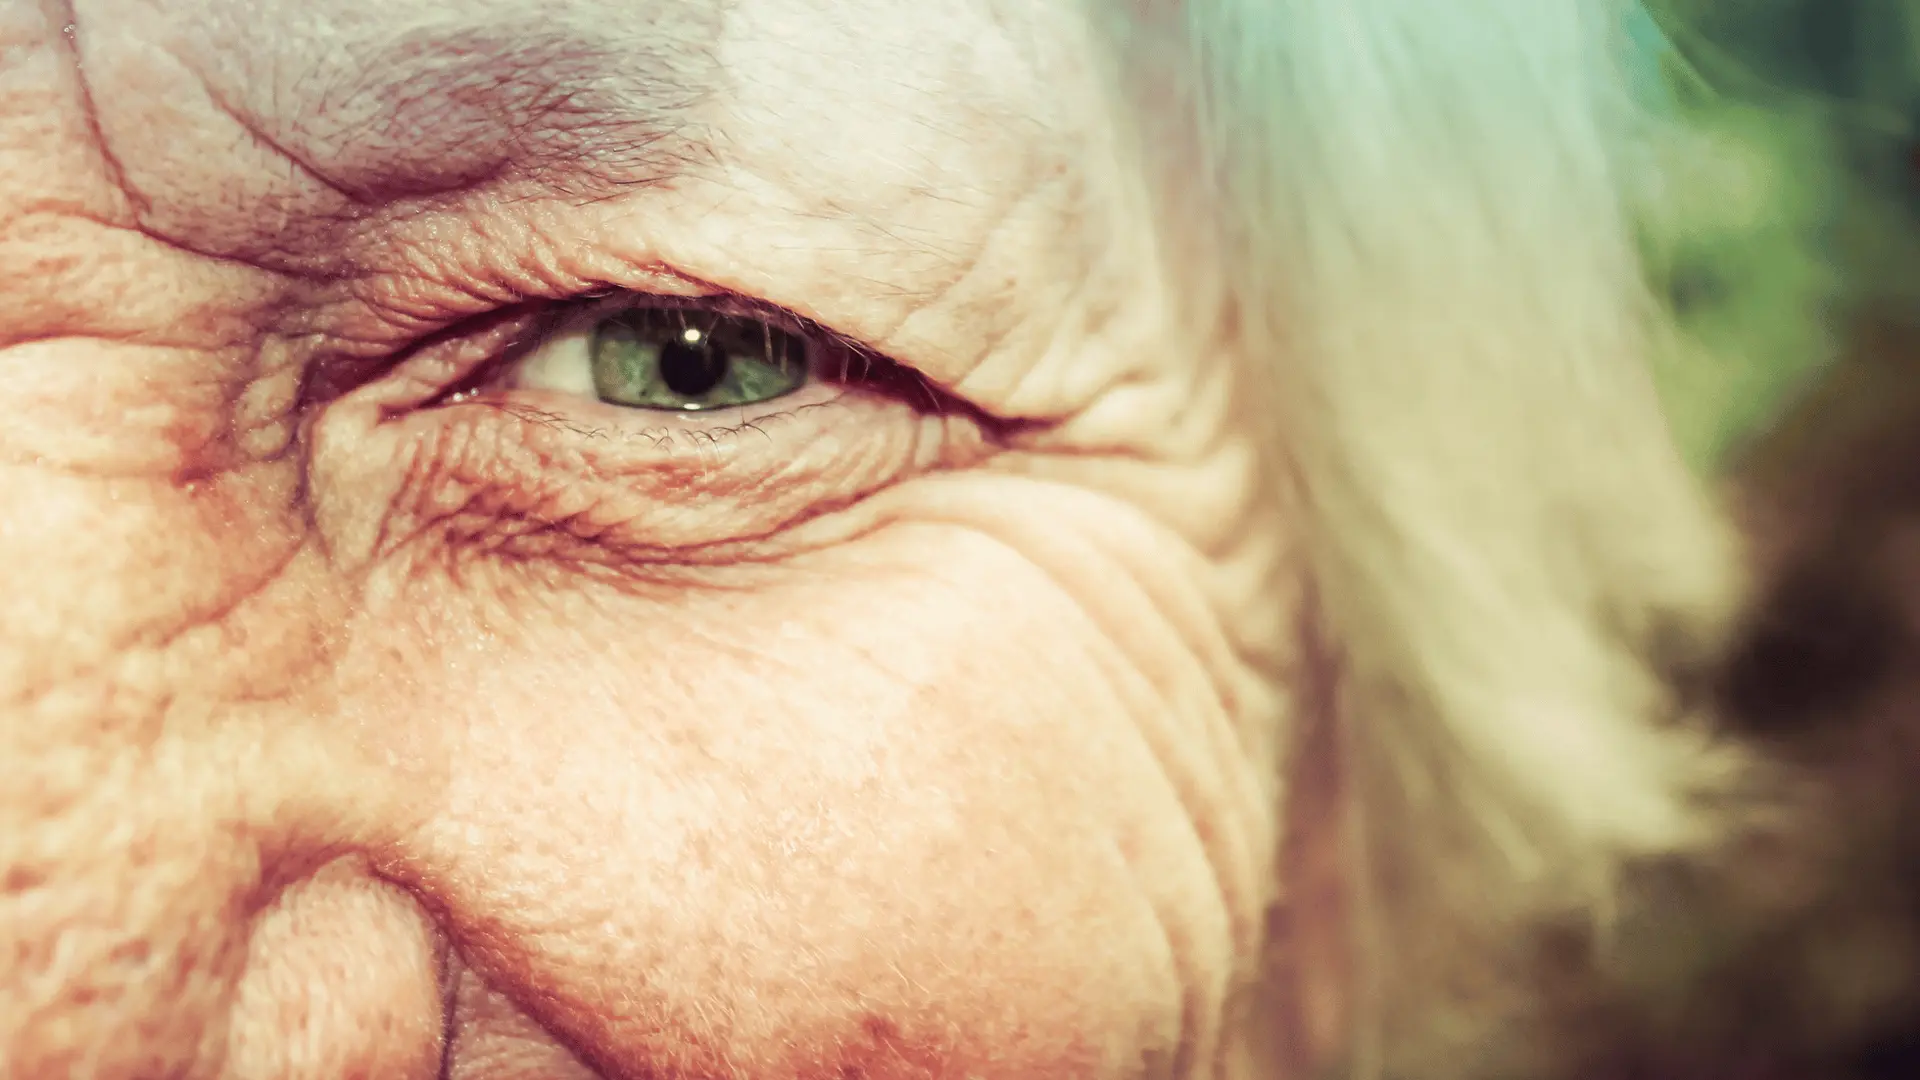 Close-up of the face of an older person